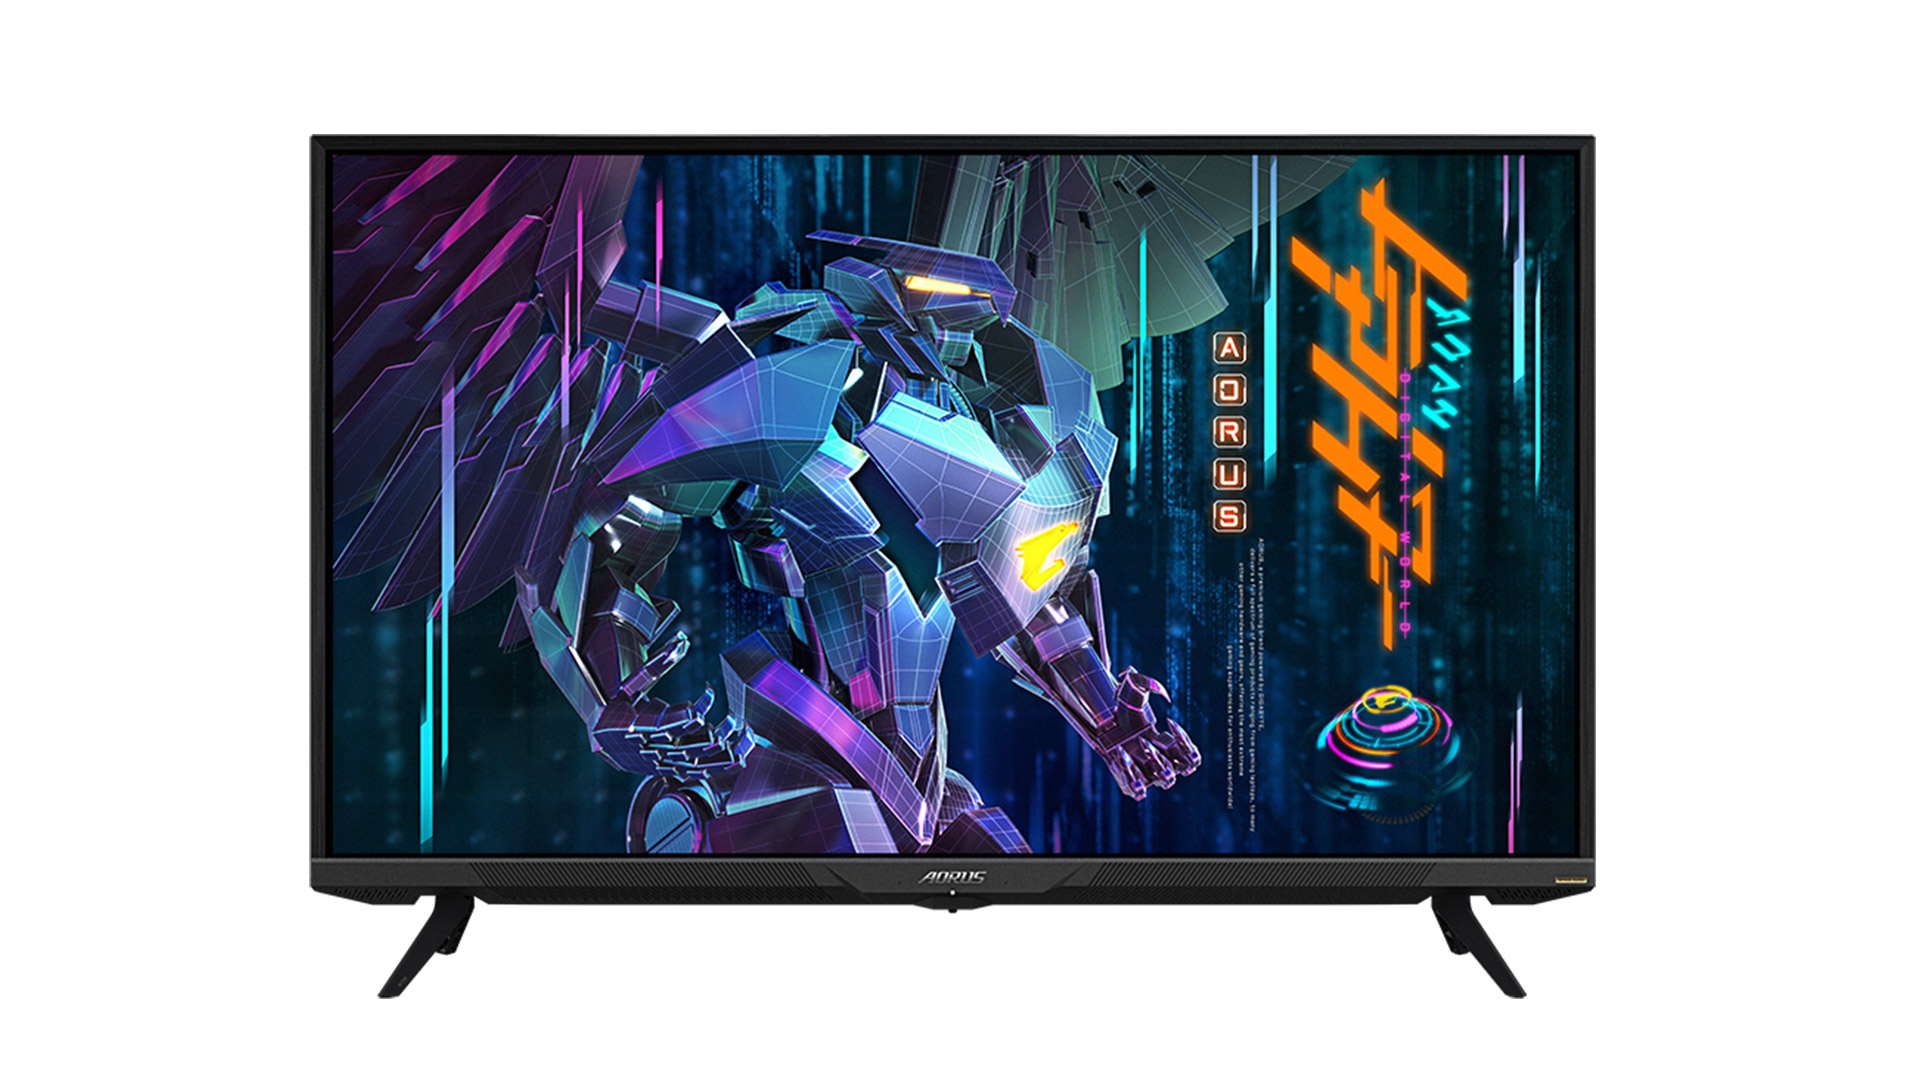 Gigabyte is announcing three gaming monitors with HDMI 2.1 and TV